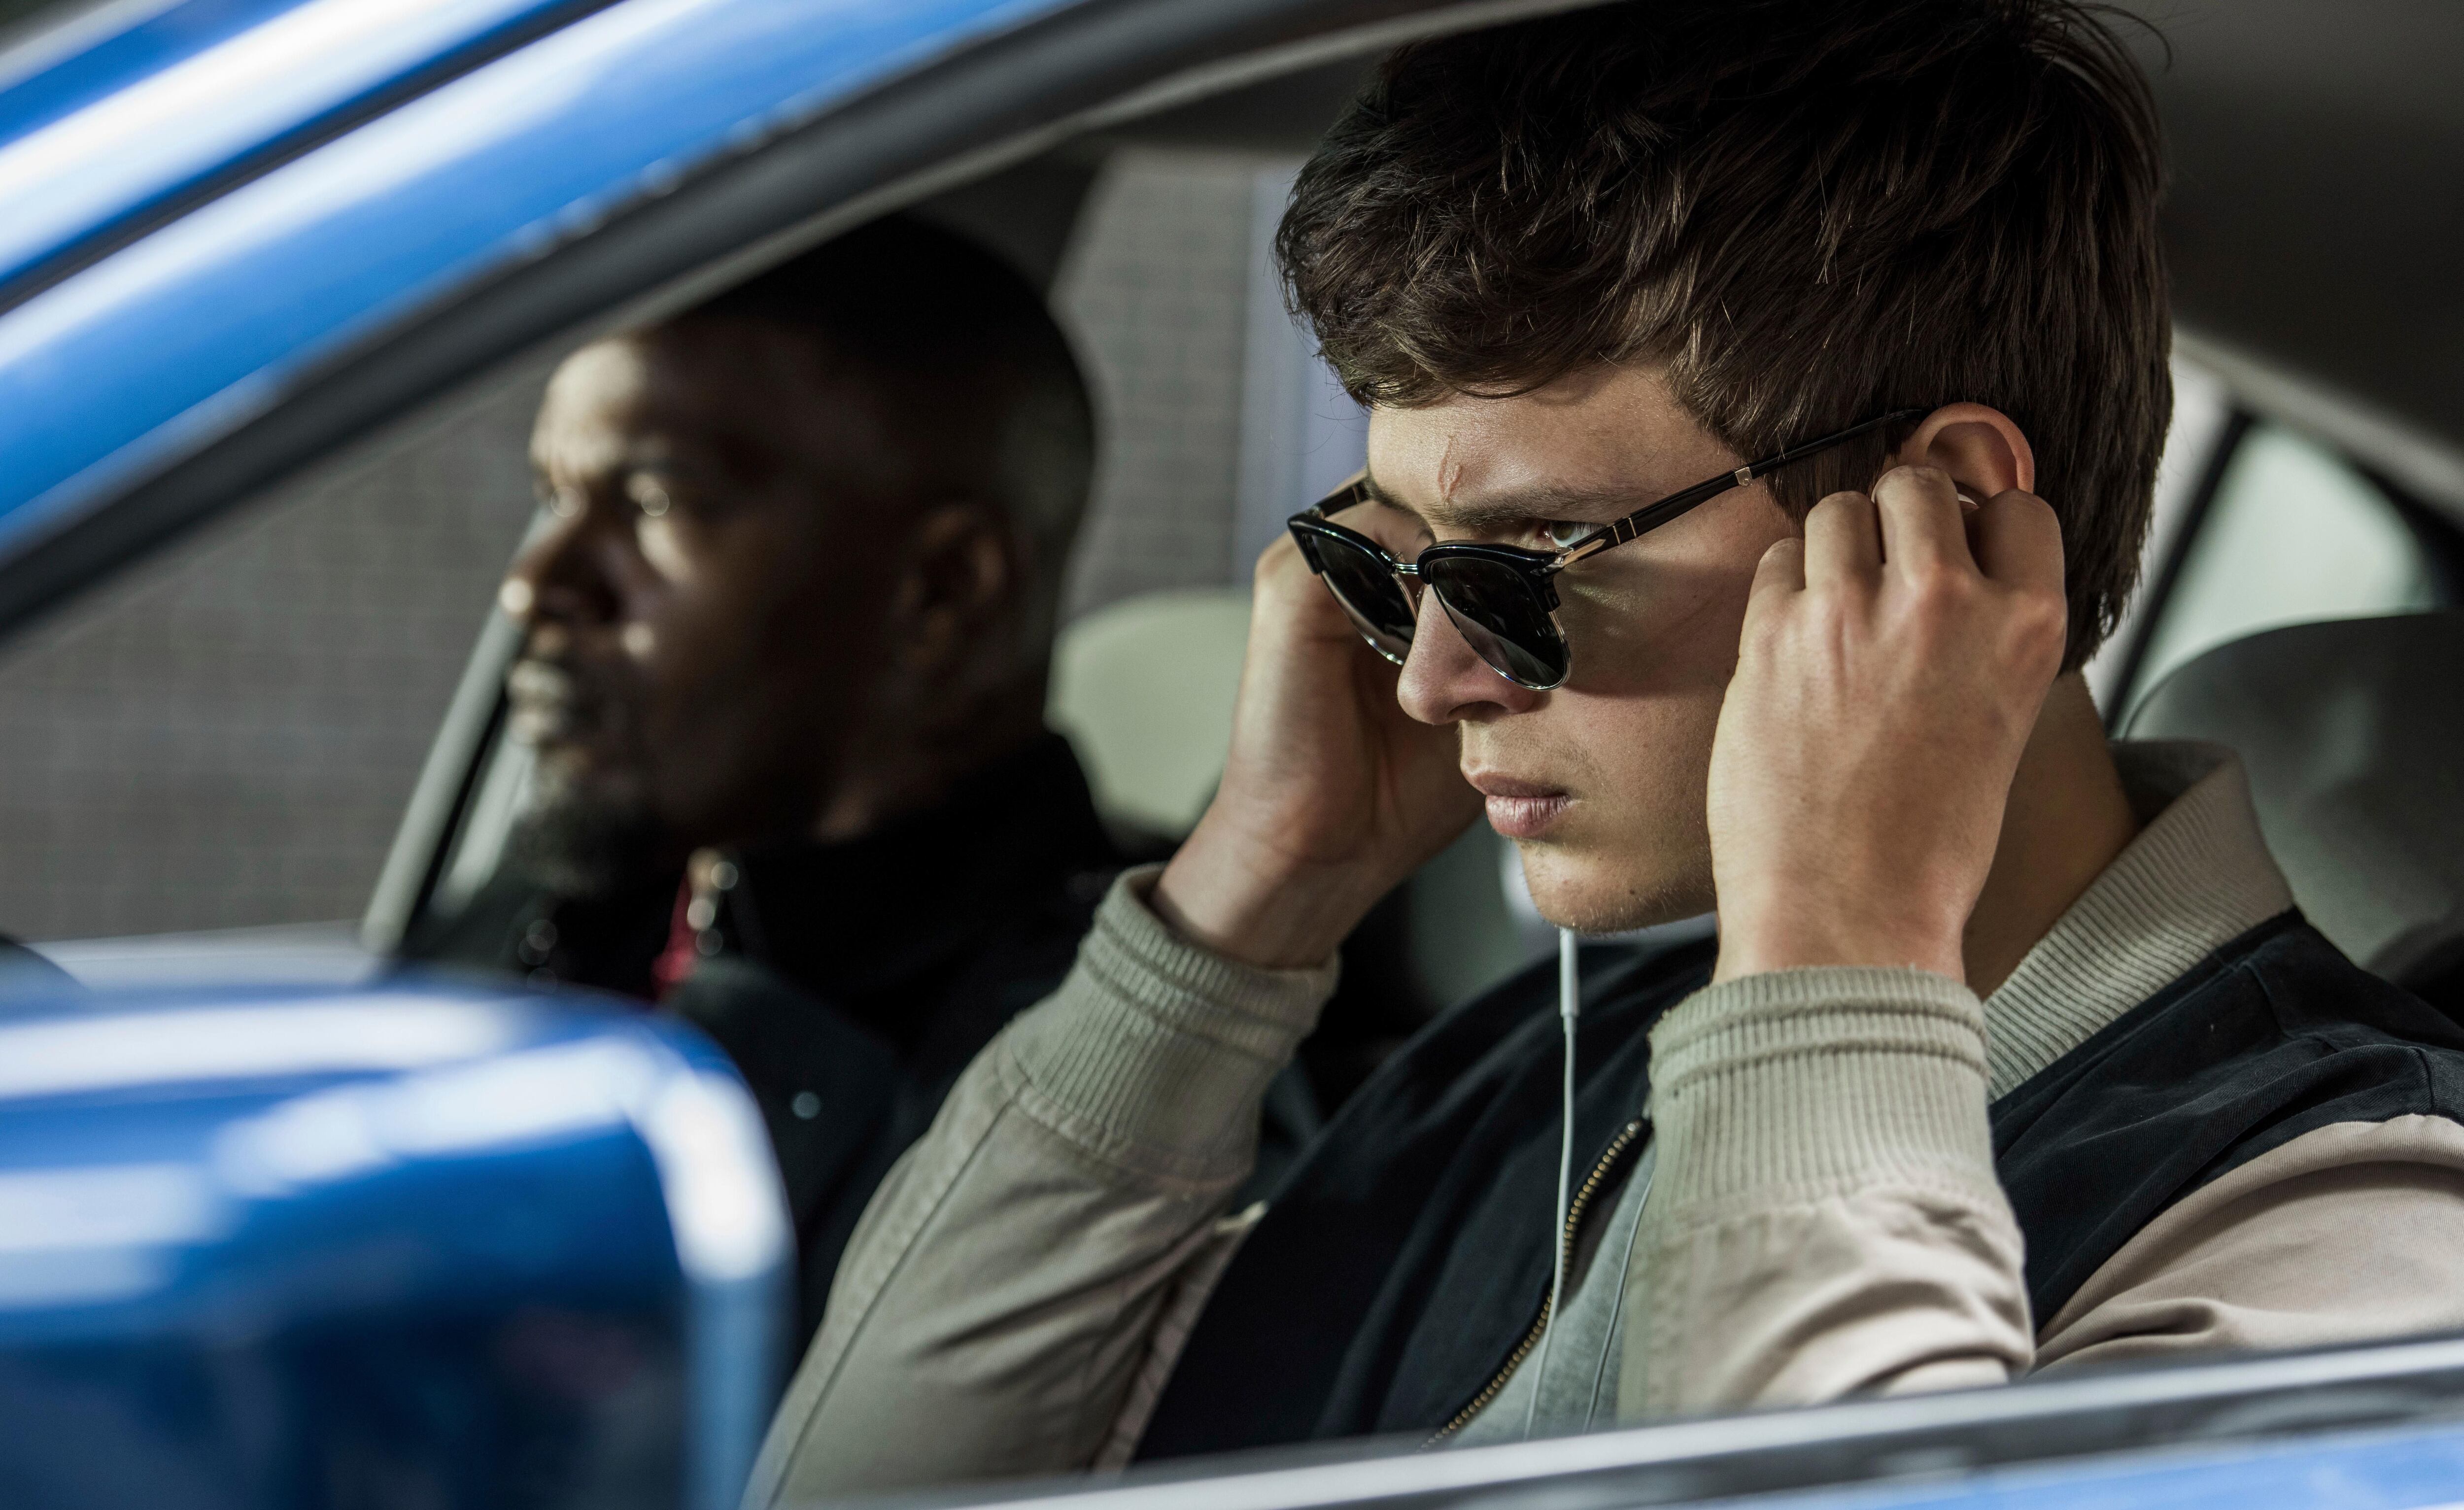 Film review: Baby Driver is a cool ride with a credible soundtrack, but the  journey lasts slightly too long